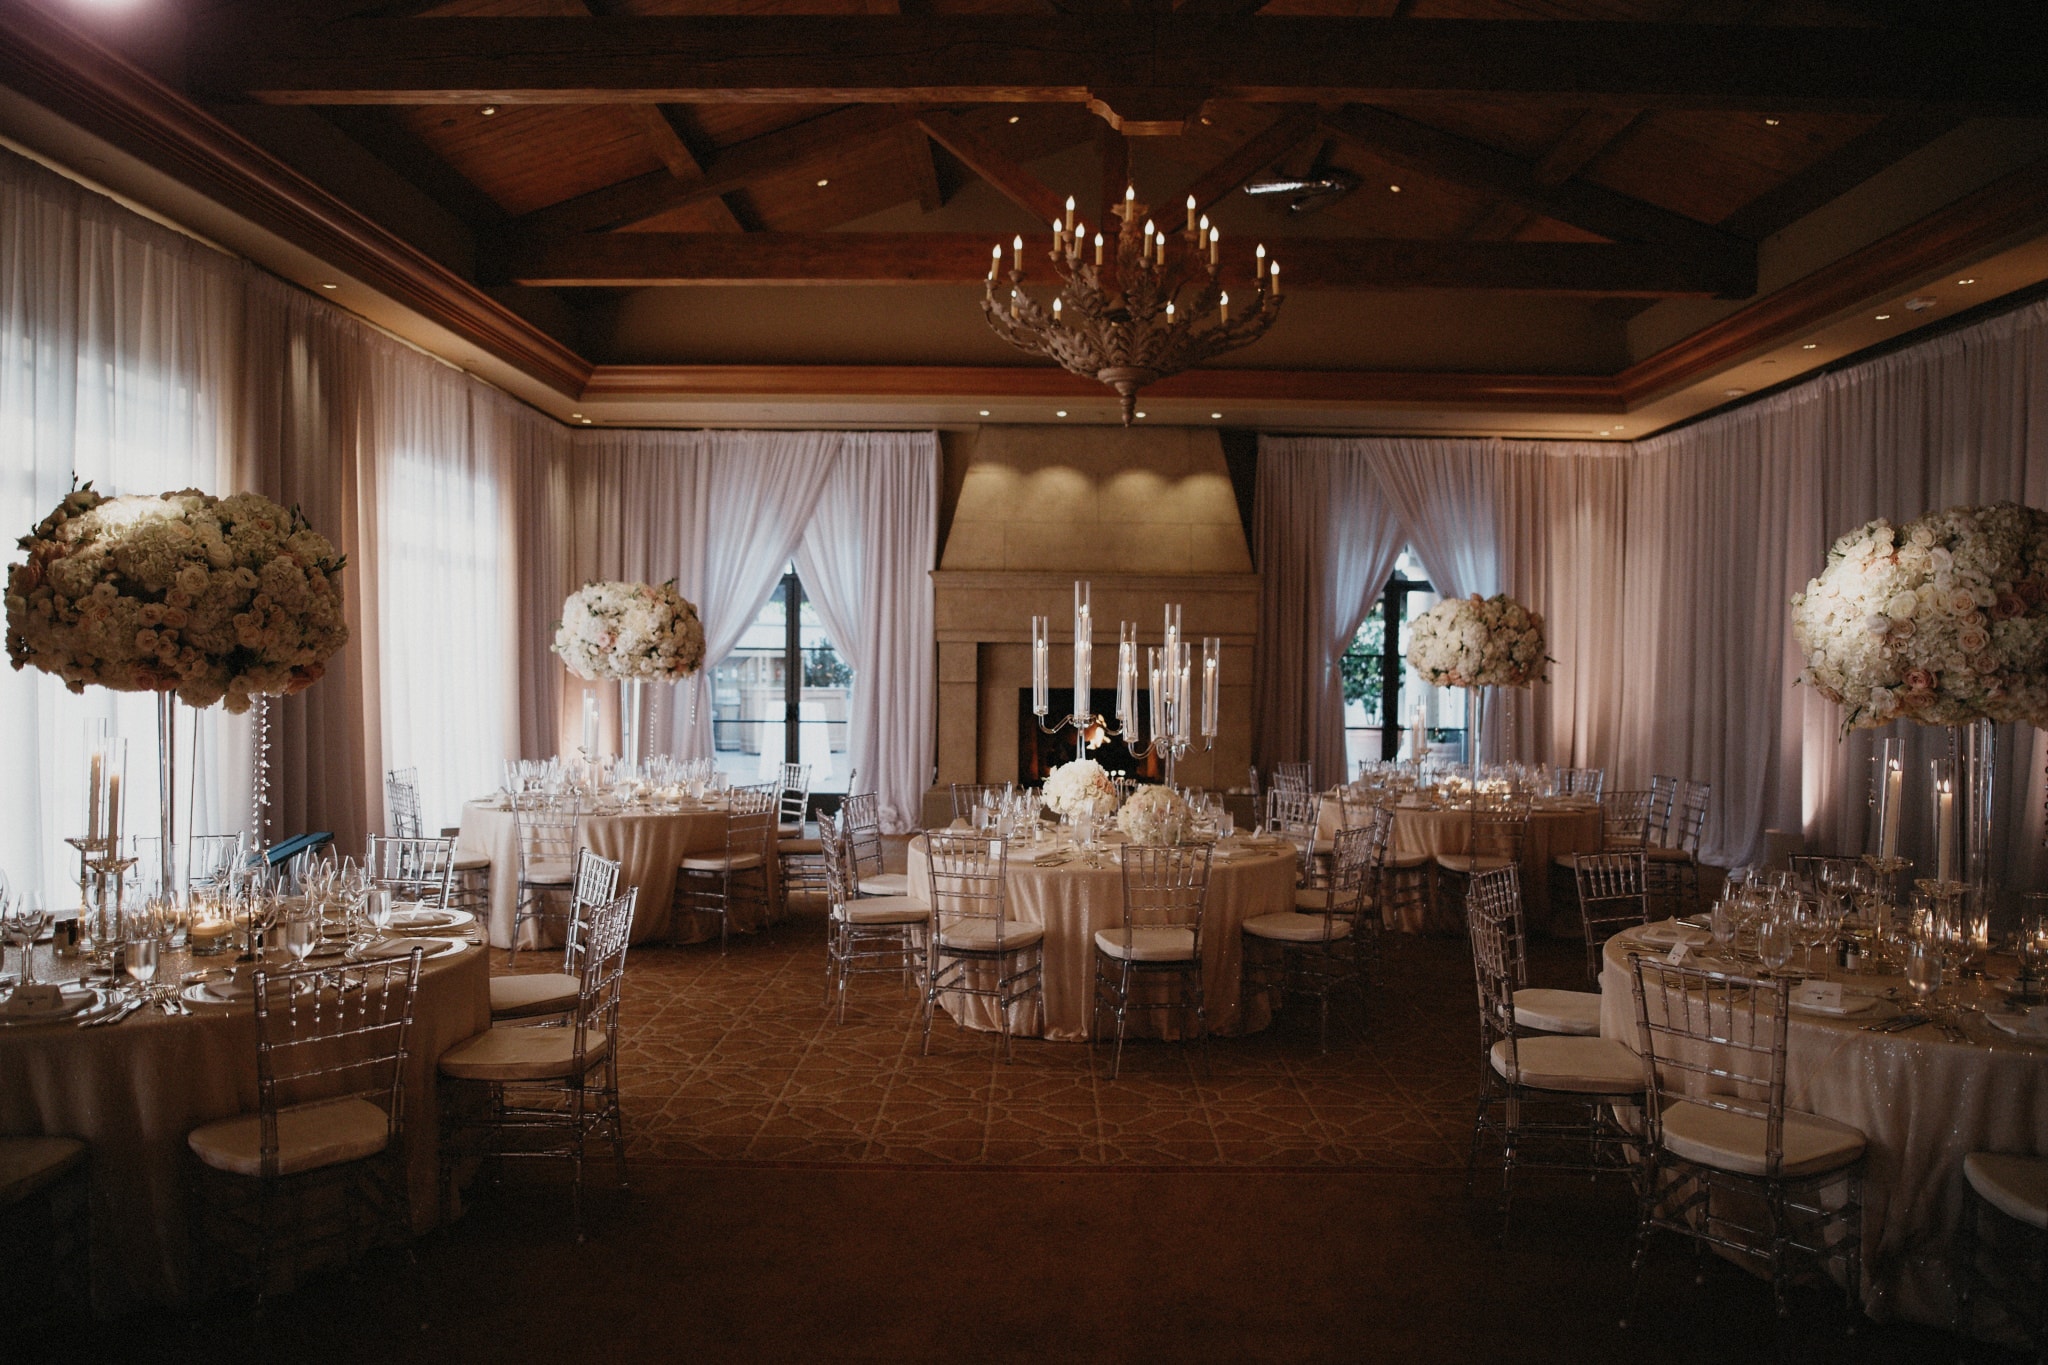 Elegantly set, round tables during a wedding reception at Pelican Hill Resort in Orange County.